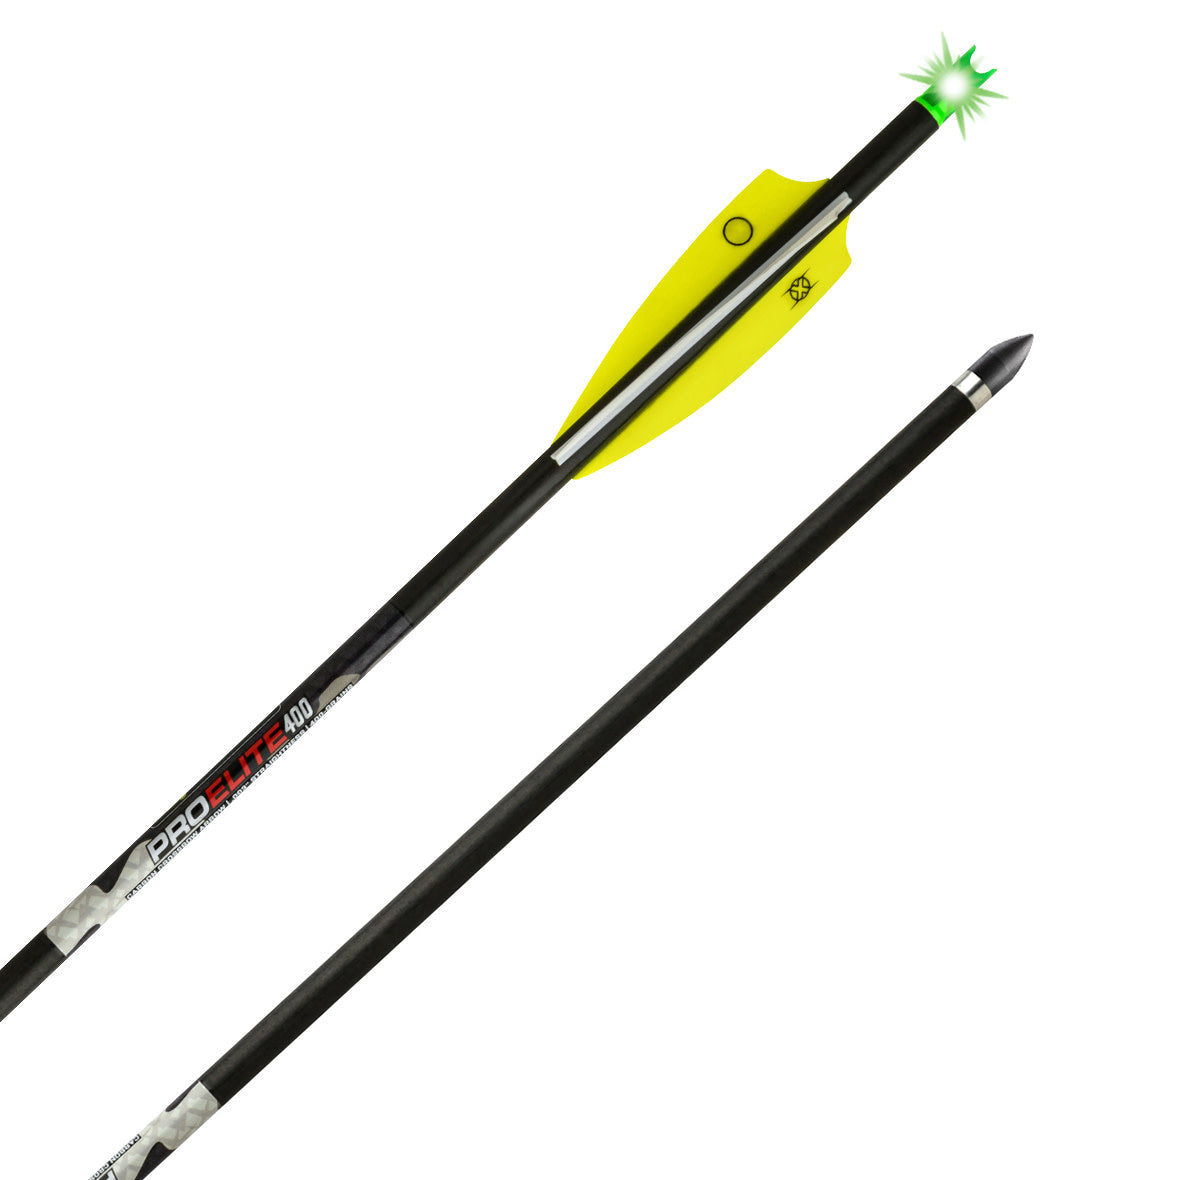 TenPoint Lighted Pro Elite 400 Carbon Crossbow Arrows - 3 Pack